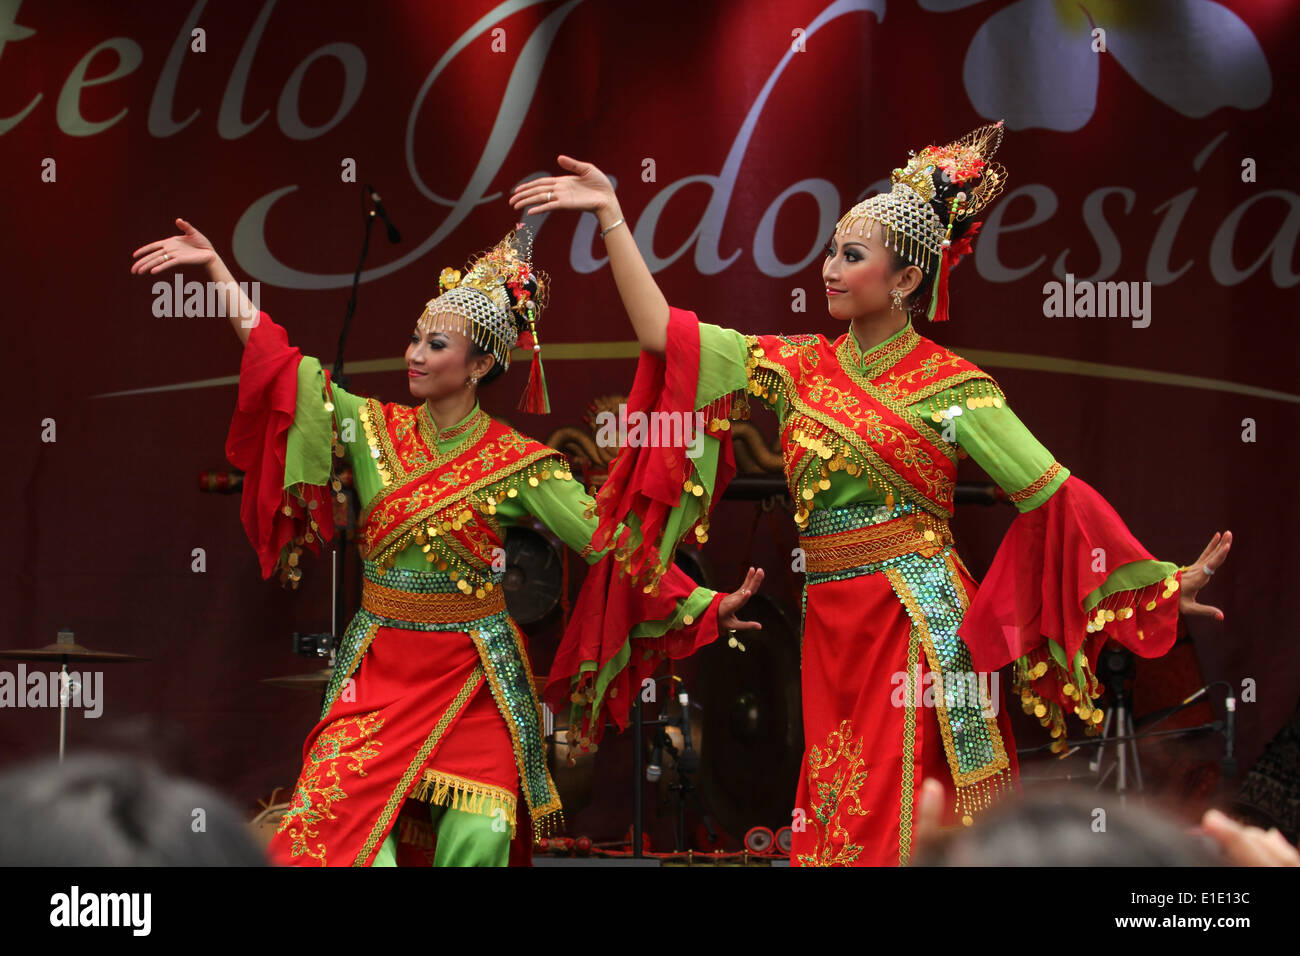 London, UK. 31 May 2014. Peree dancer from Sumatra. The dance is a thanks giving dance to the gods and is performed with food on plates.. Credit: David Mbiyu/ Alamy Live News Stock Photo